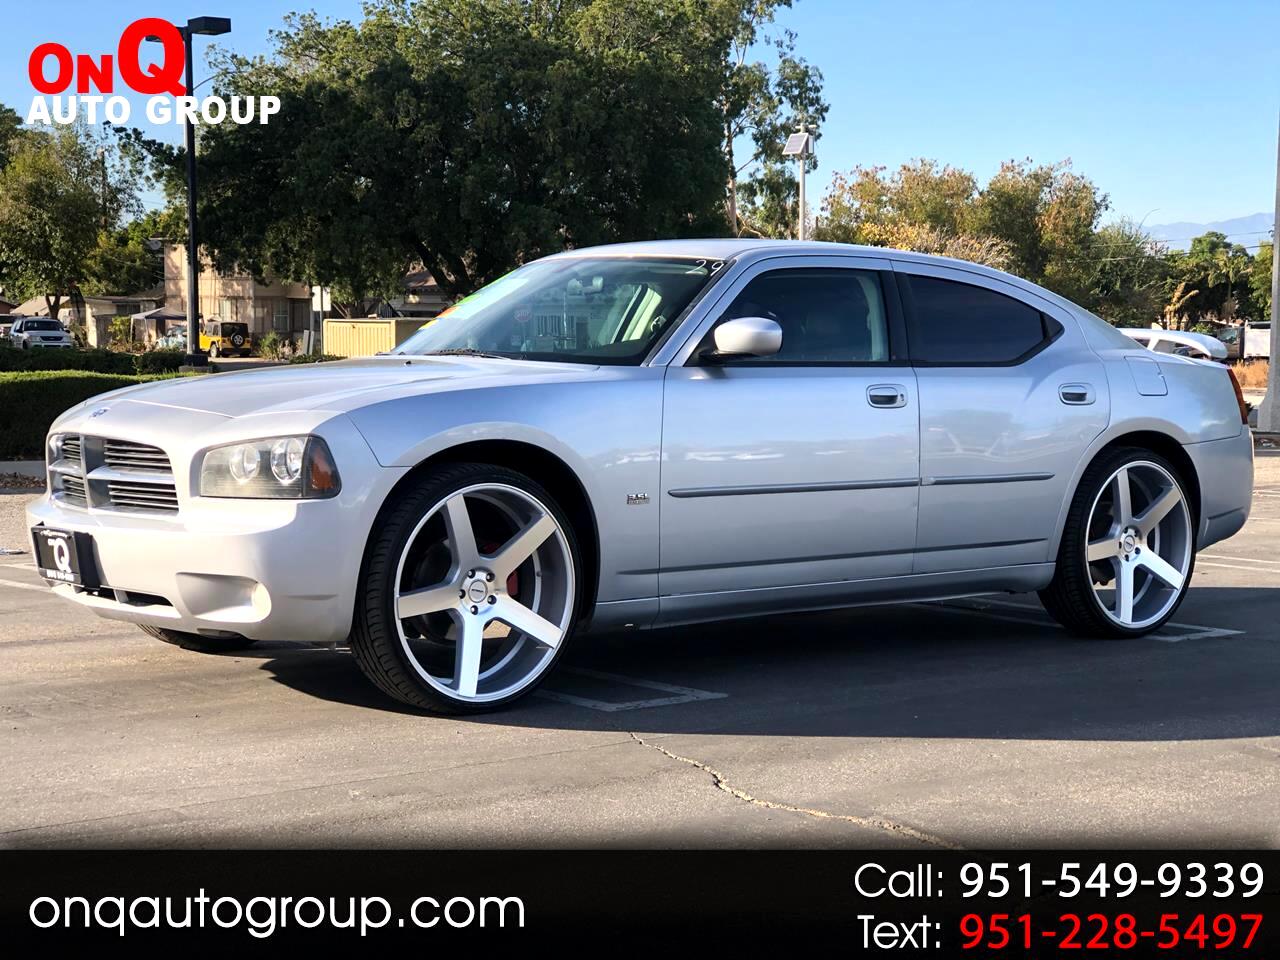 Used 2010 Dodge Charger 4dr Sdn Sxt Rwd For Sale In Corona